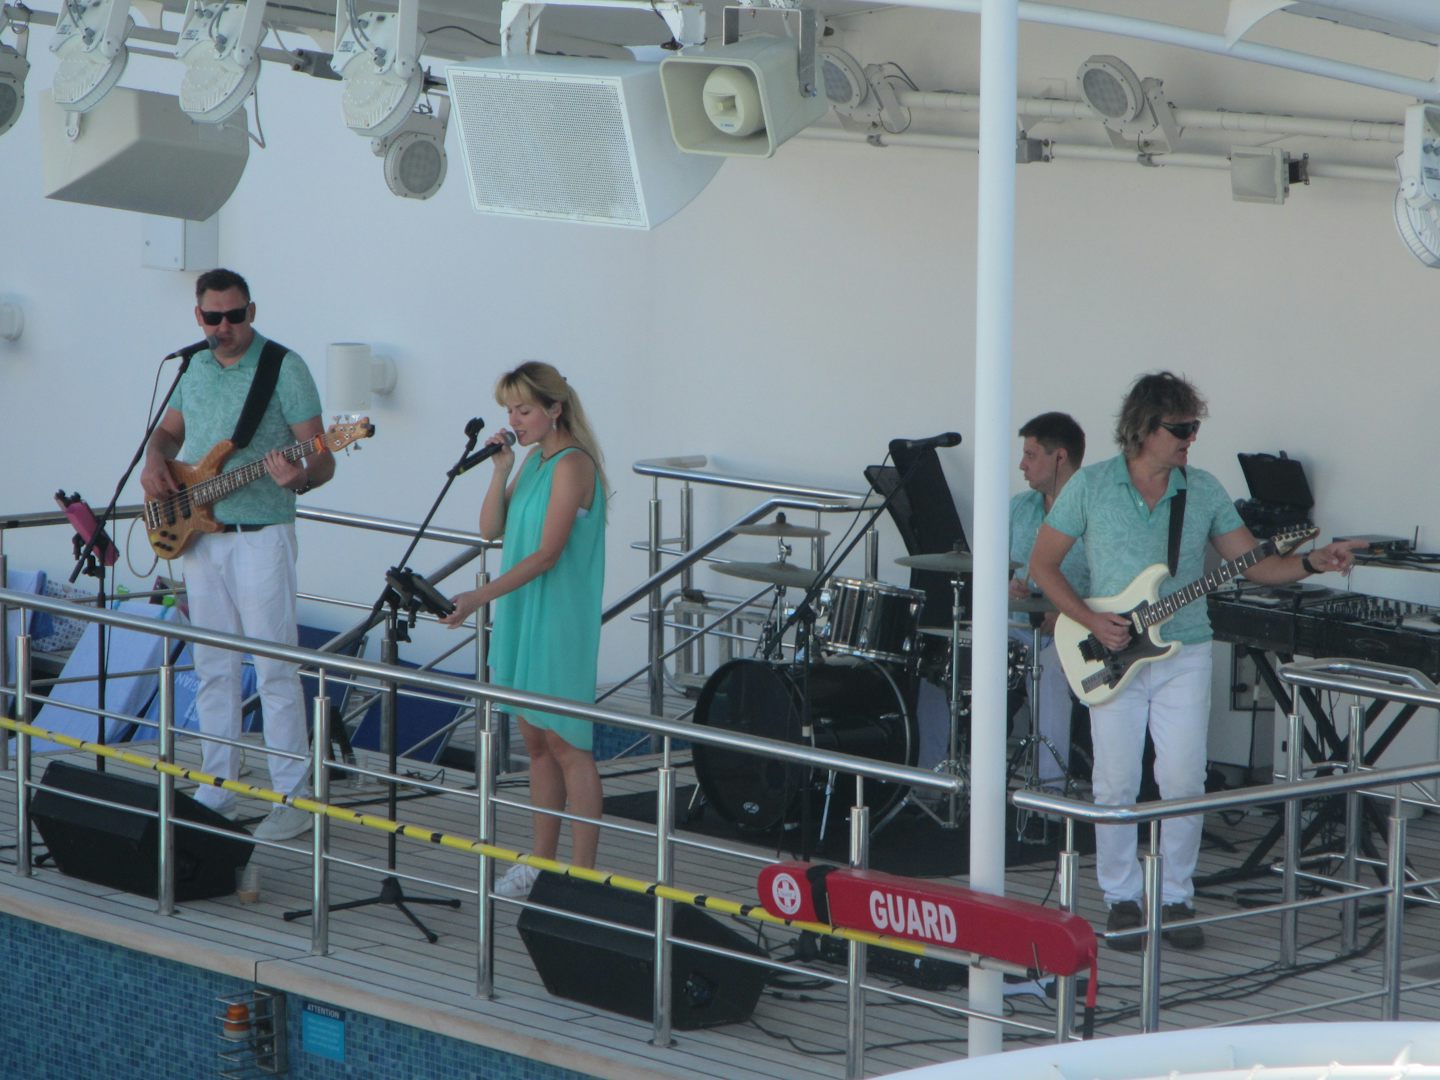 Band by the pool "Lets Groove" Excellent entertainers!